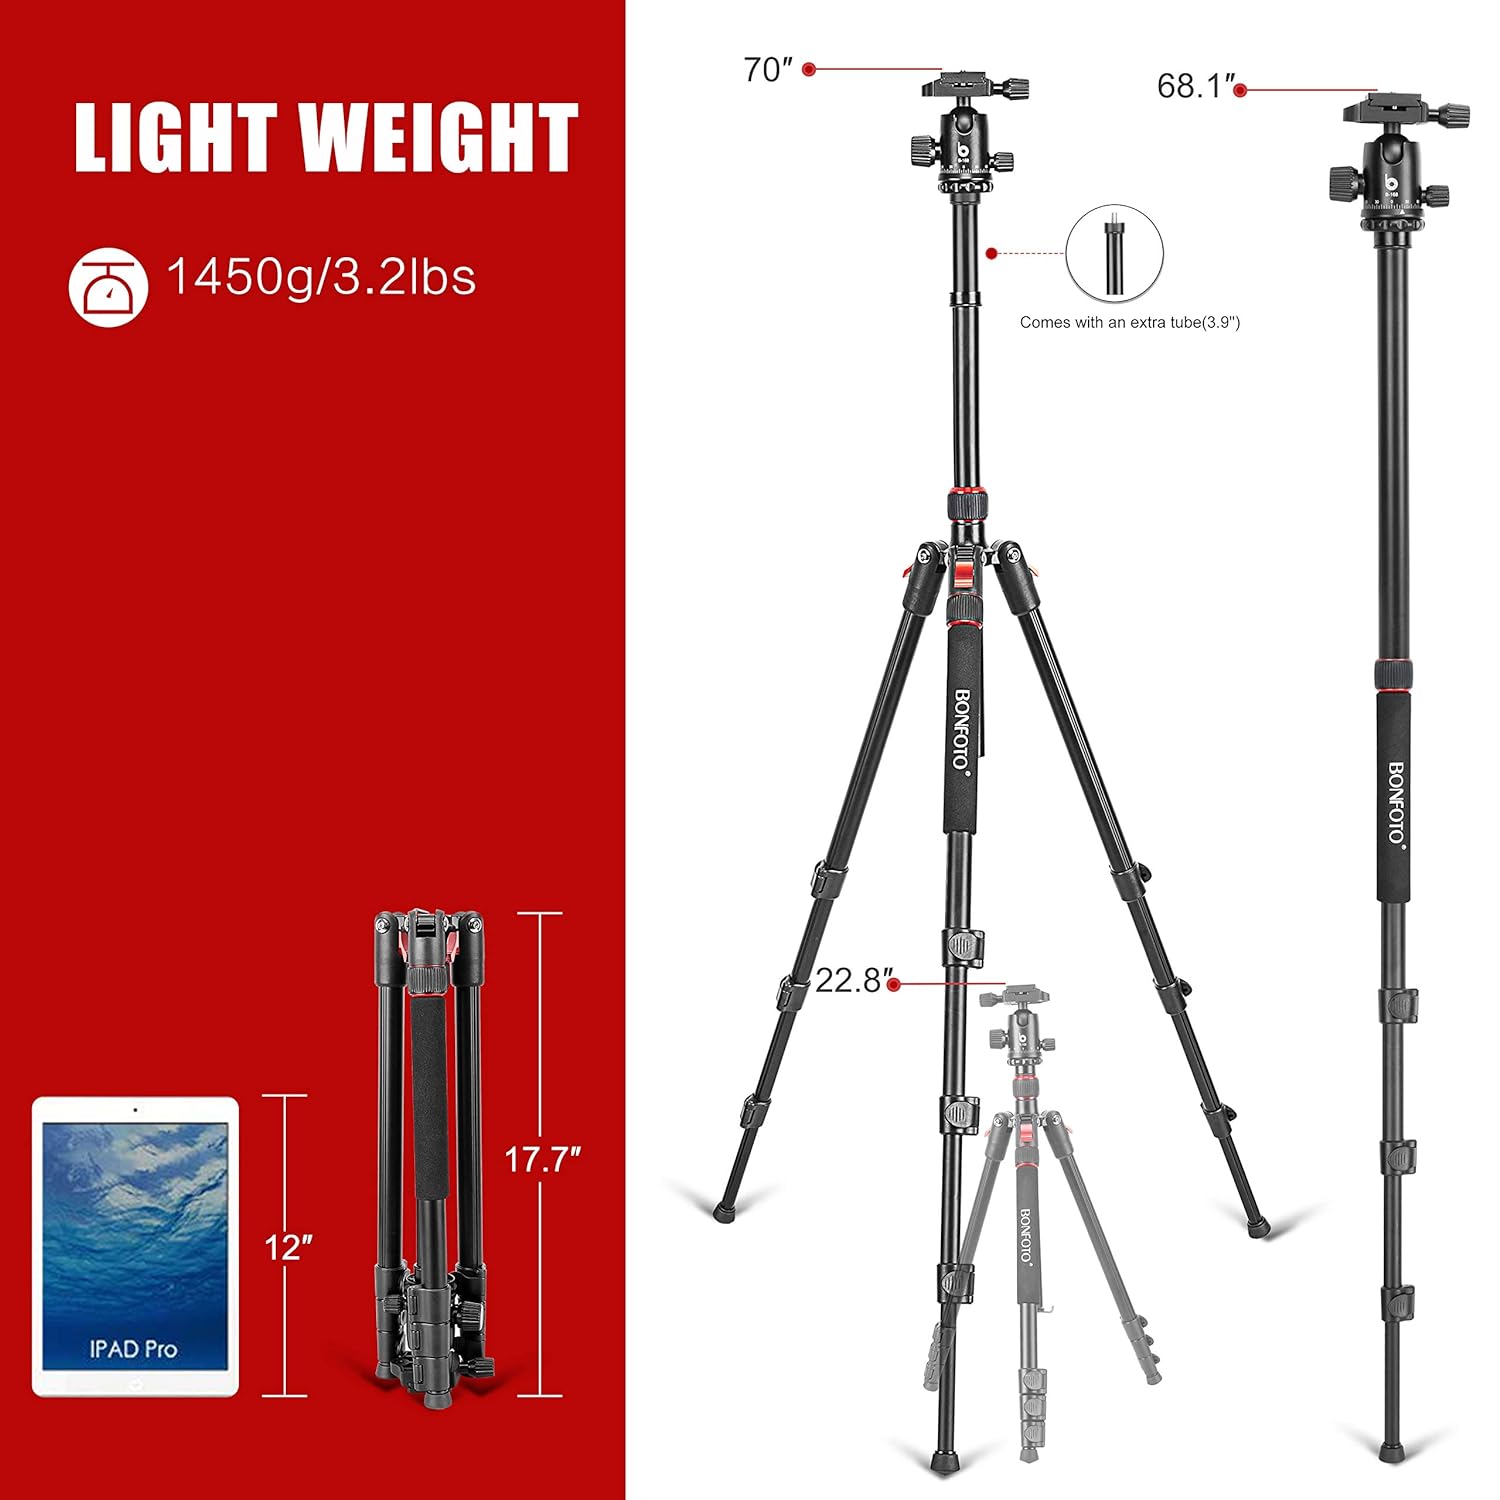 70 Inches Tripod, Lightweight Aluminum Camera Tripod for DSLR, Photography Tripod with 360 Degree Ball Head 1/4" Quick Release Plate Load up to 18 Pounds